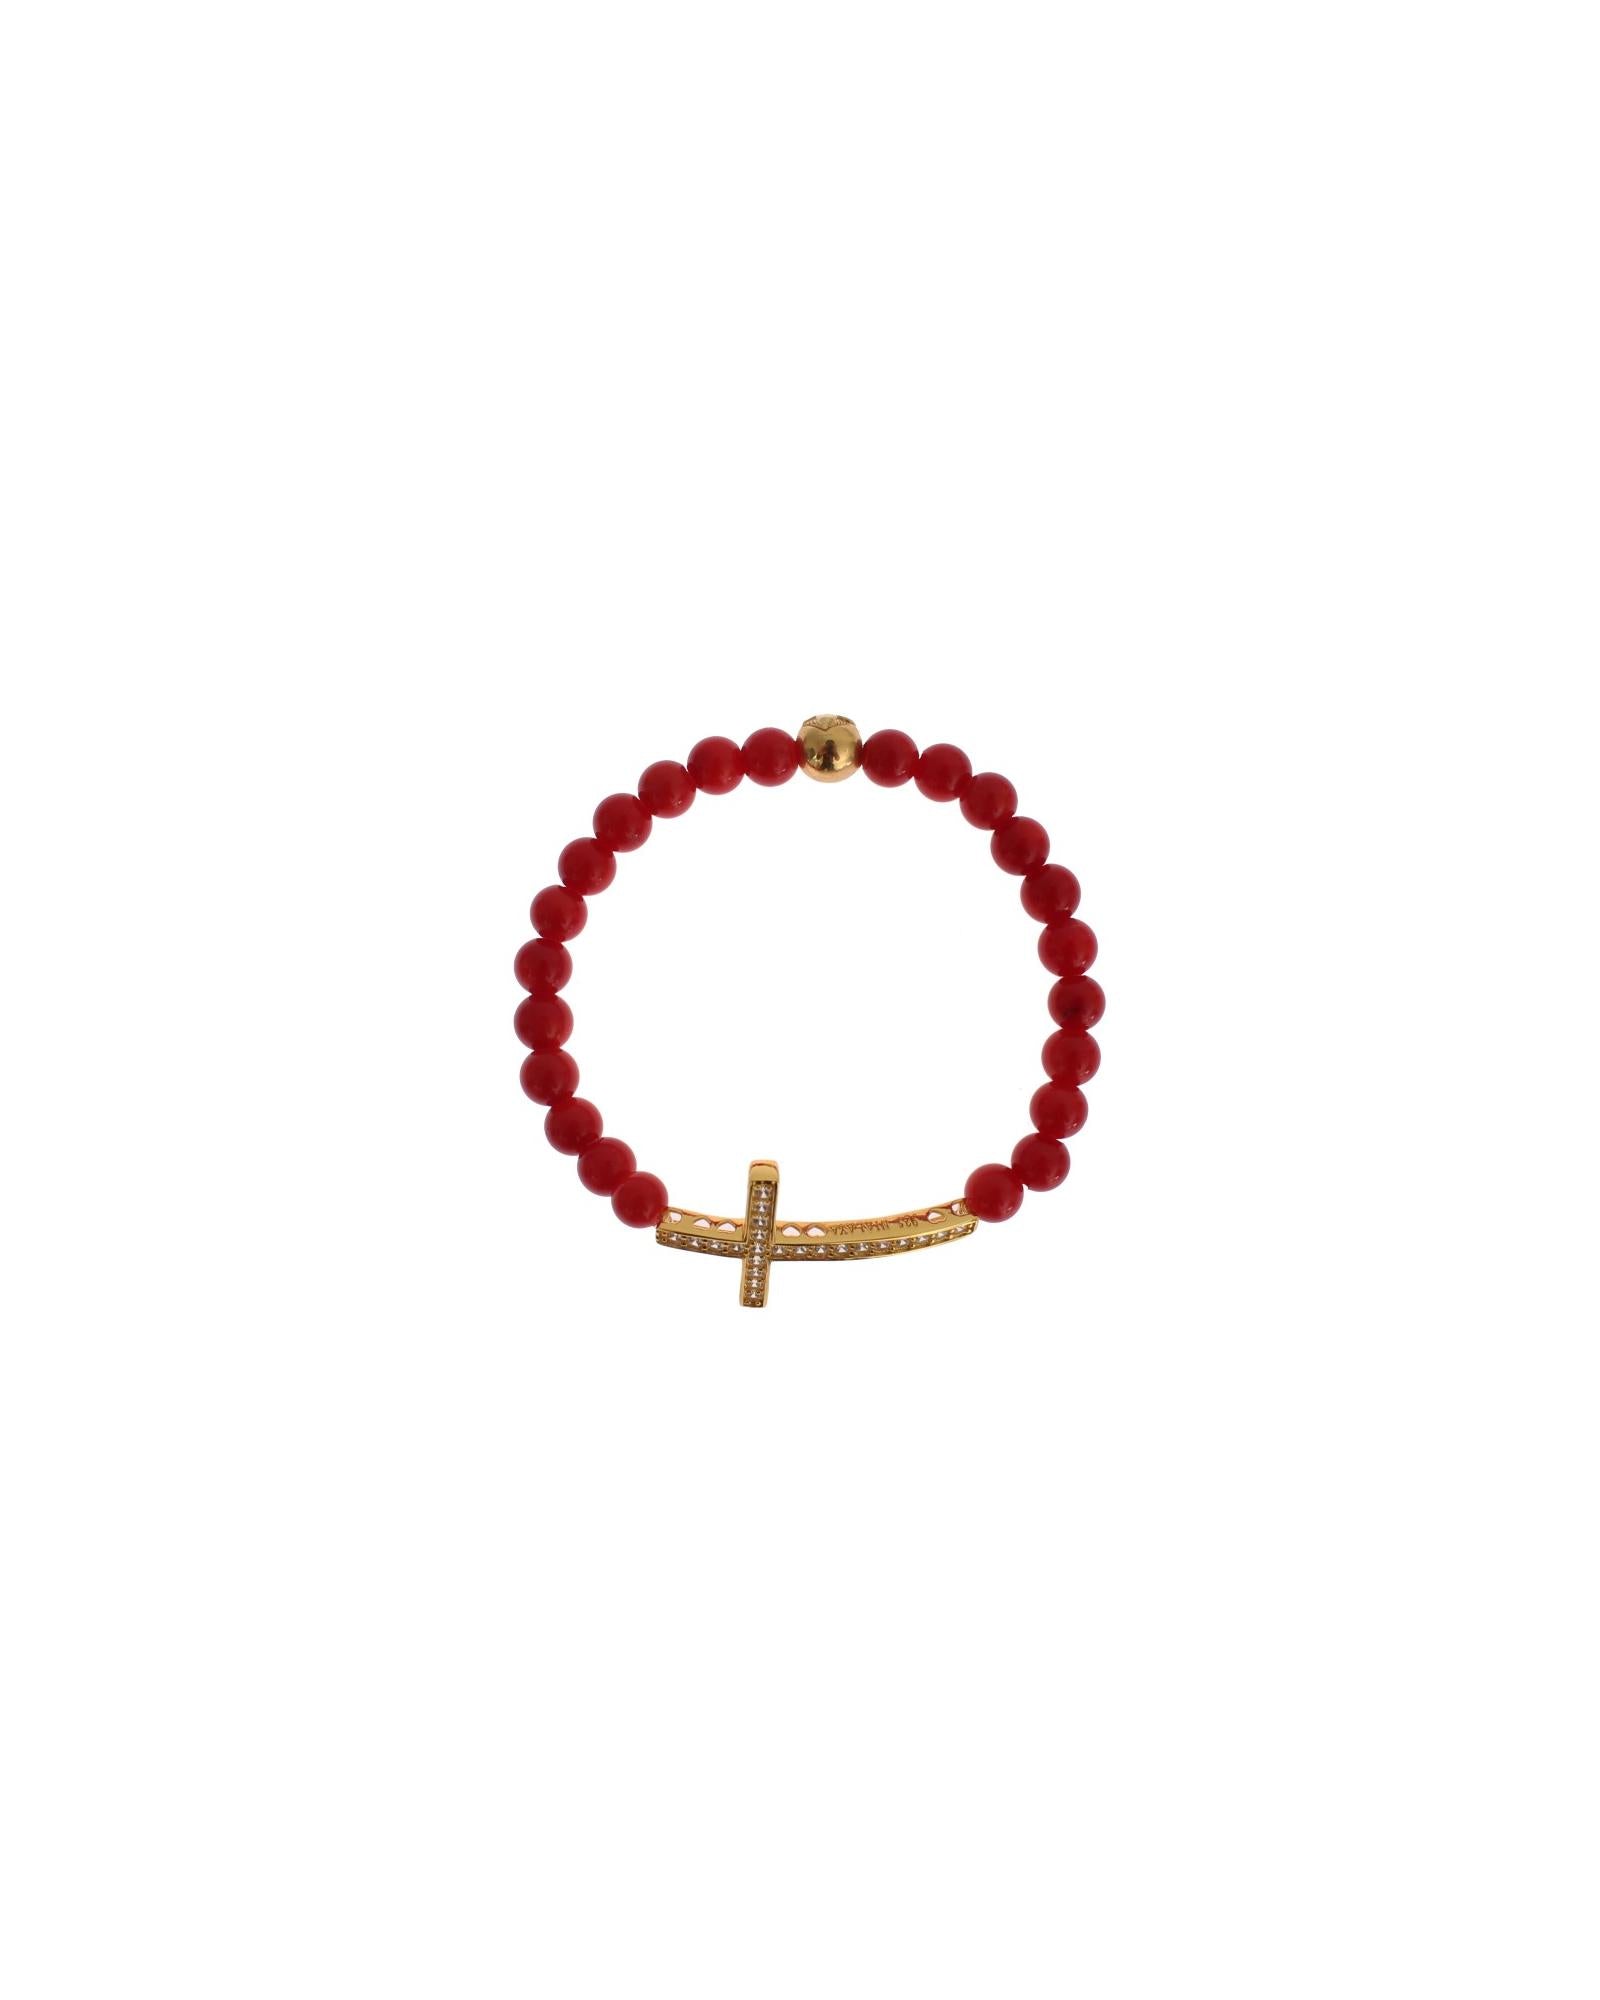 Authentic NIALAYA Gold Plated Silver Bracelet with Red Coral Beads and CZ Diamond Cross S Women